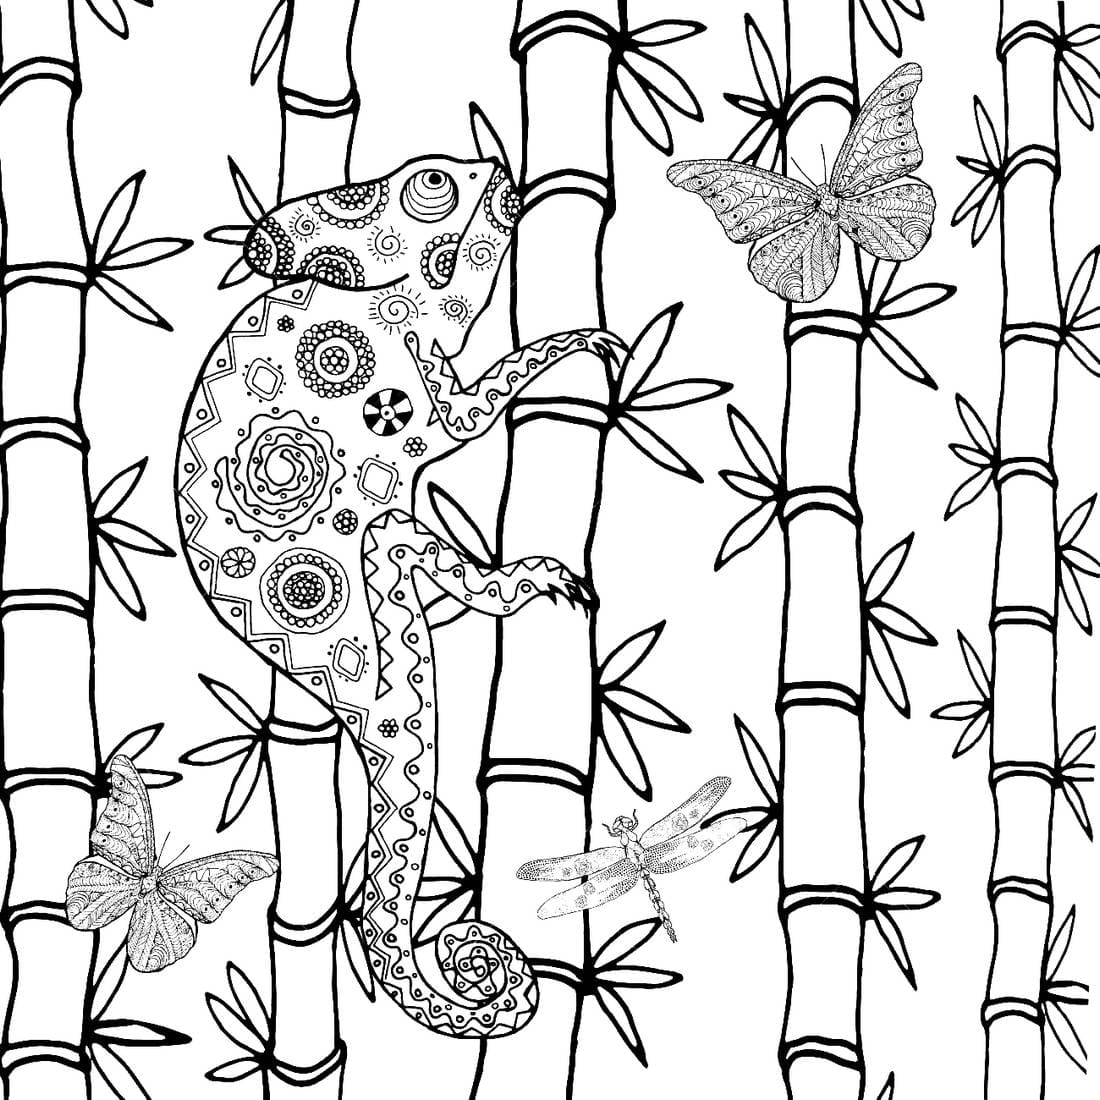 Chameleon coloring pages - Free coloring pages | WONDER DAY — Coloring pages  for children and adults